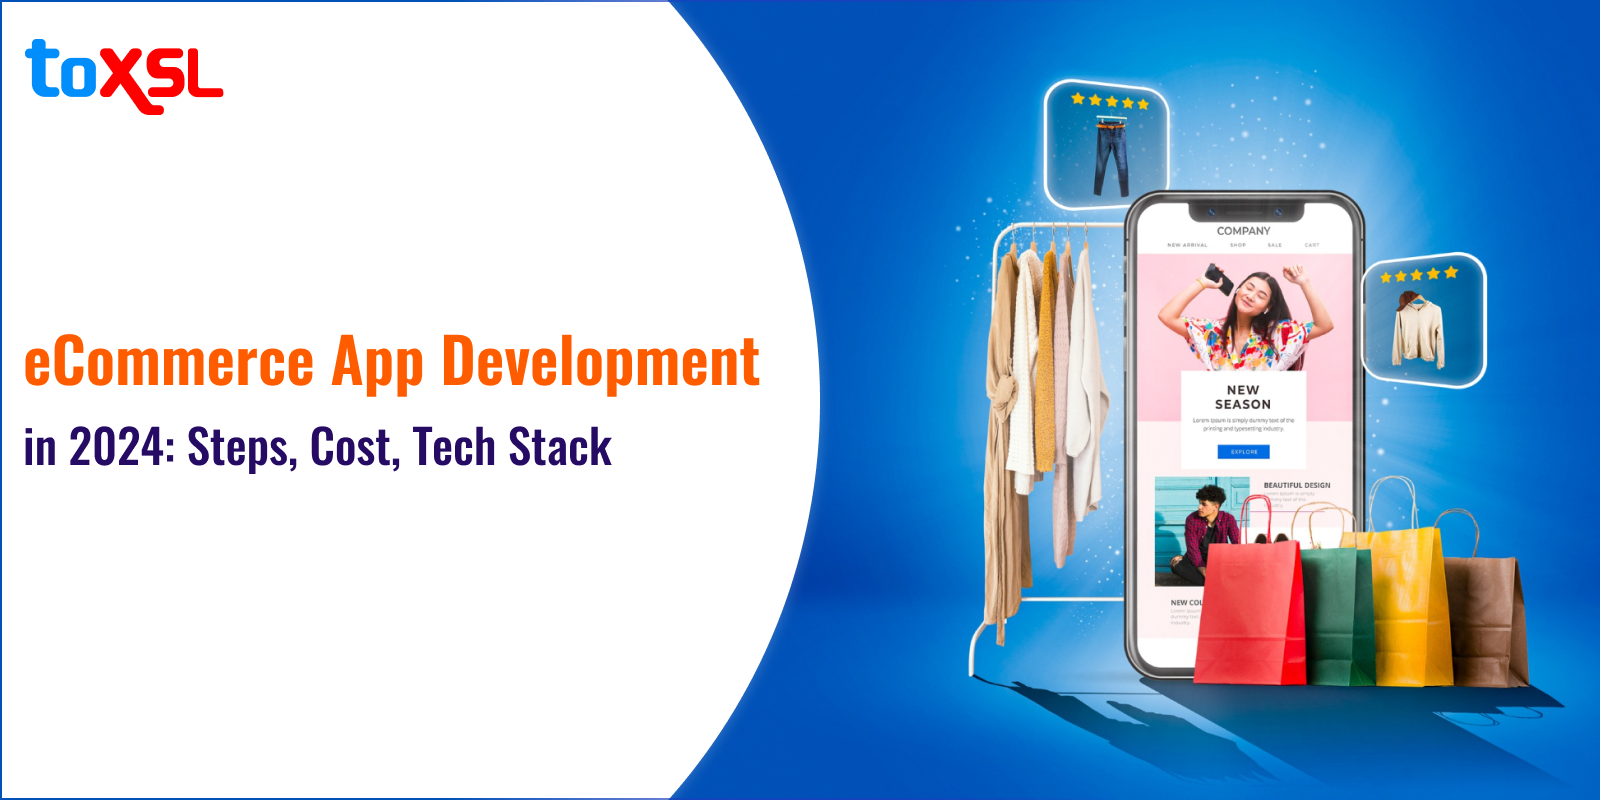 Ecommerce App Development in 2024: Steps, Cost, Tech Stack